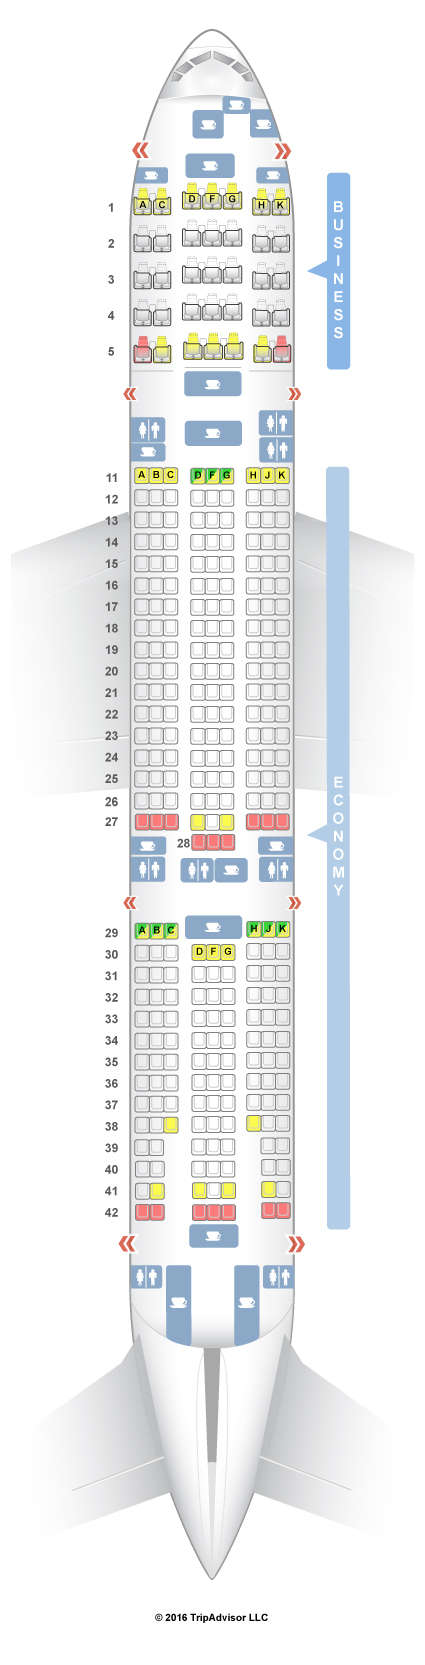 772 Boeing 777 Seating Chart